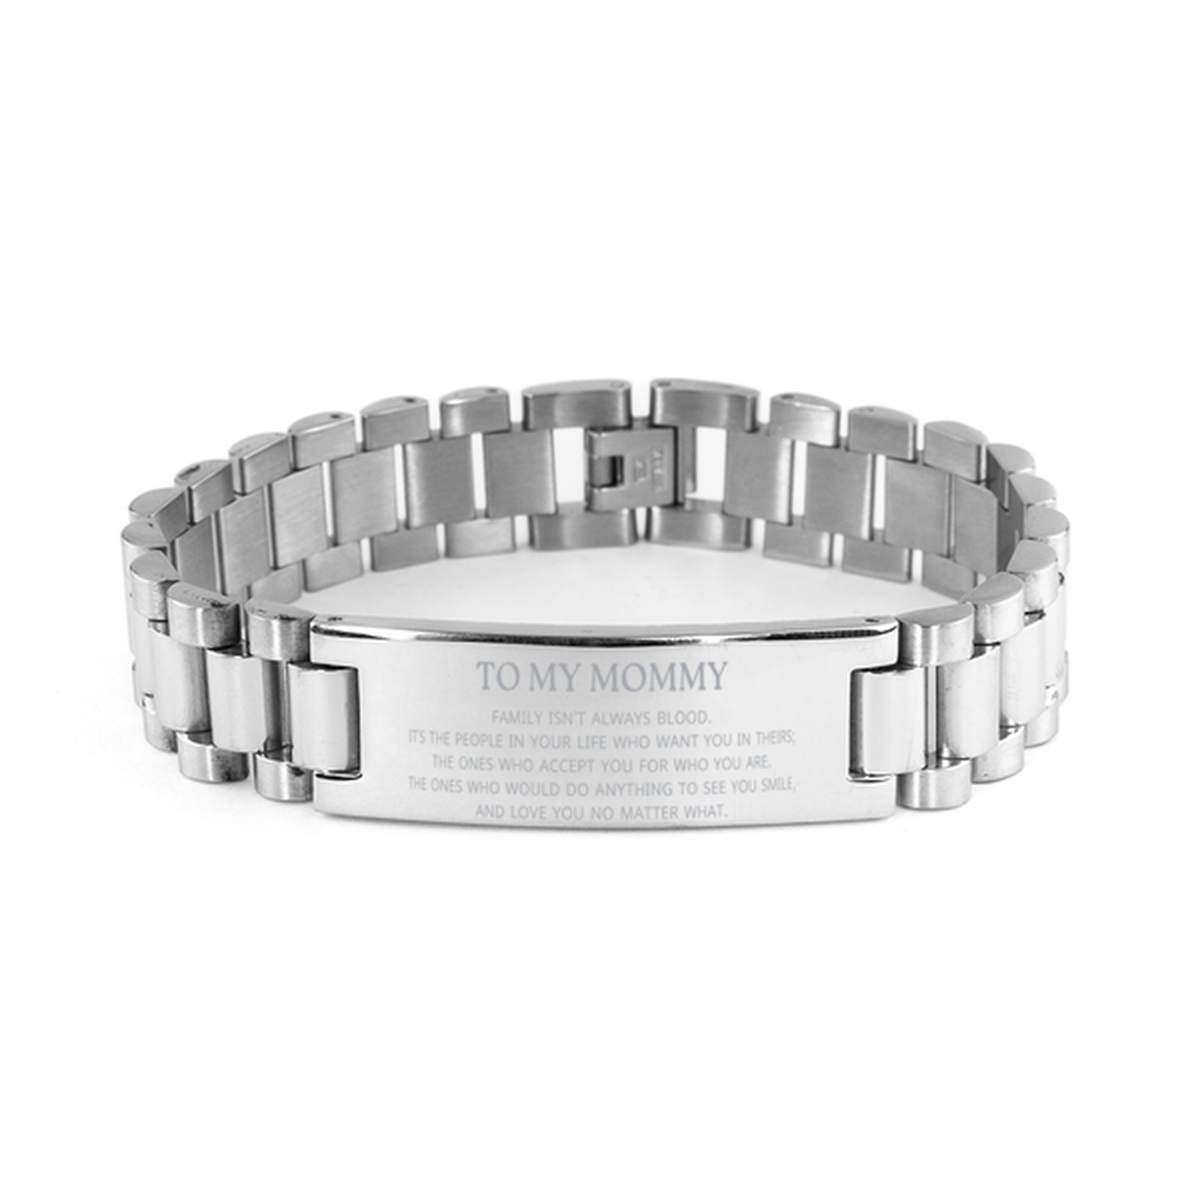 To My Mommy Gifts, Family isn't always blood, Mommy Ladder Stainless Steel Bracelet, Birthday Christmas Unique Present For Mommy